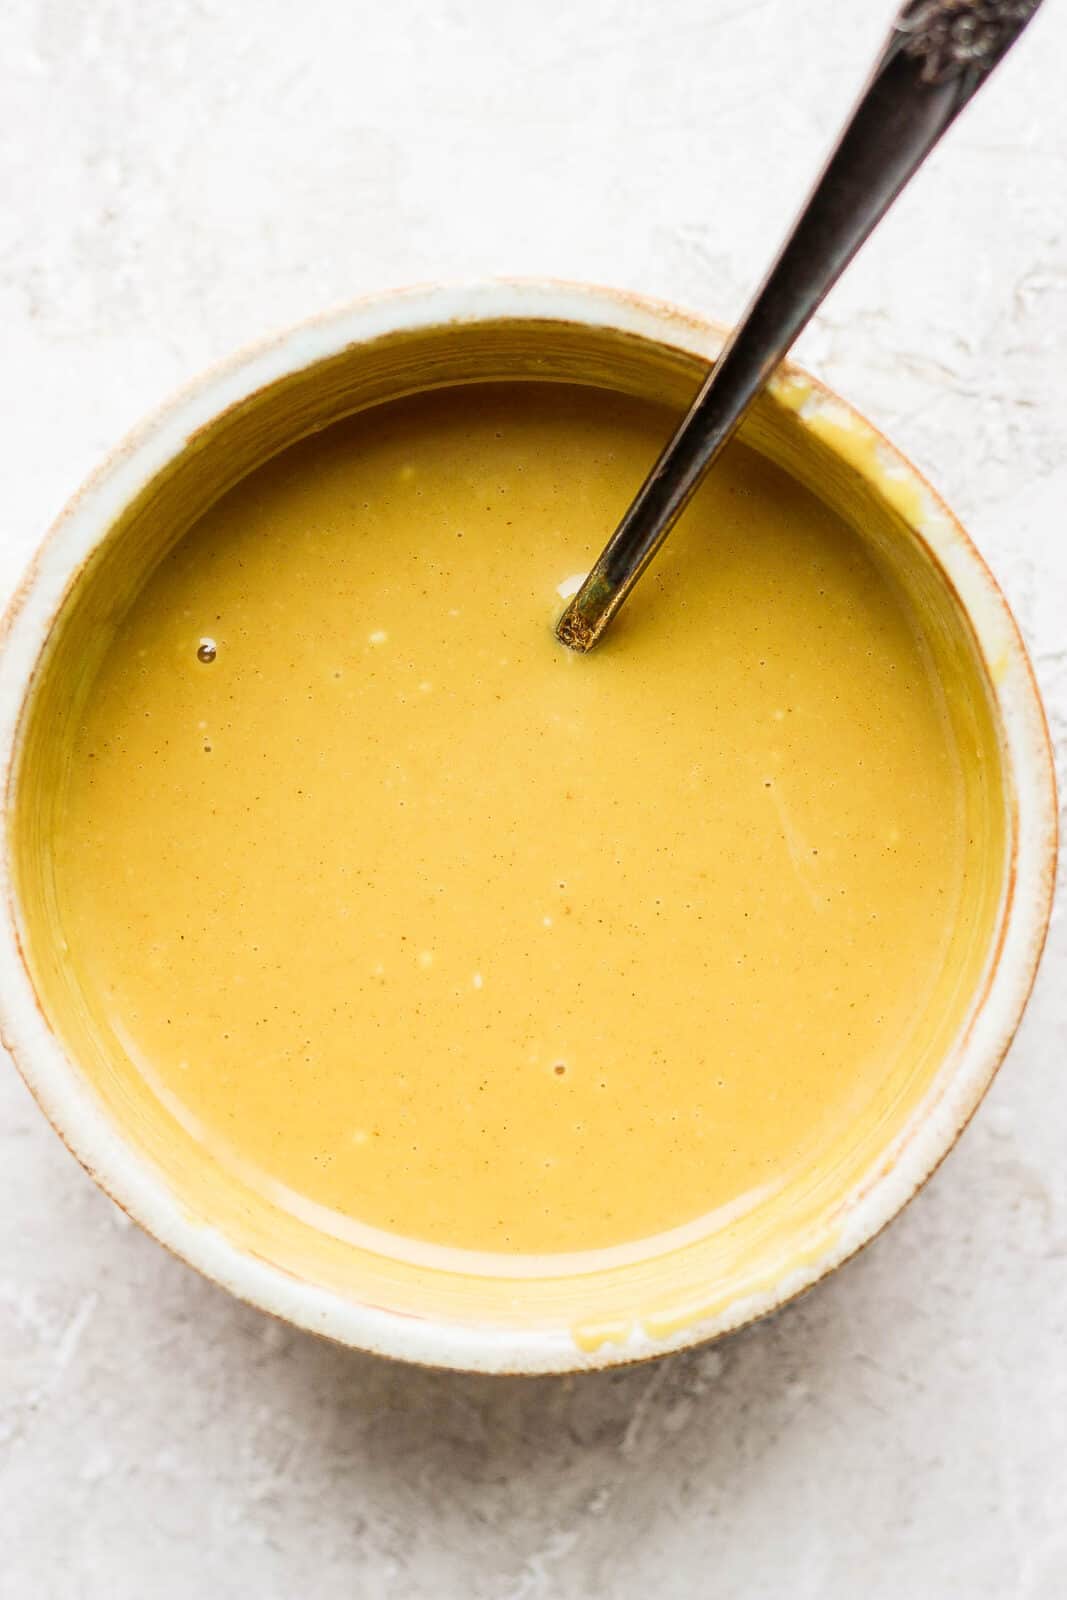 Homemade honey mustard in a bowl with a spoon.